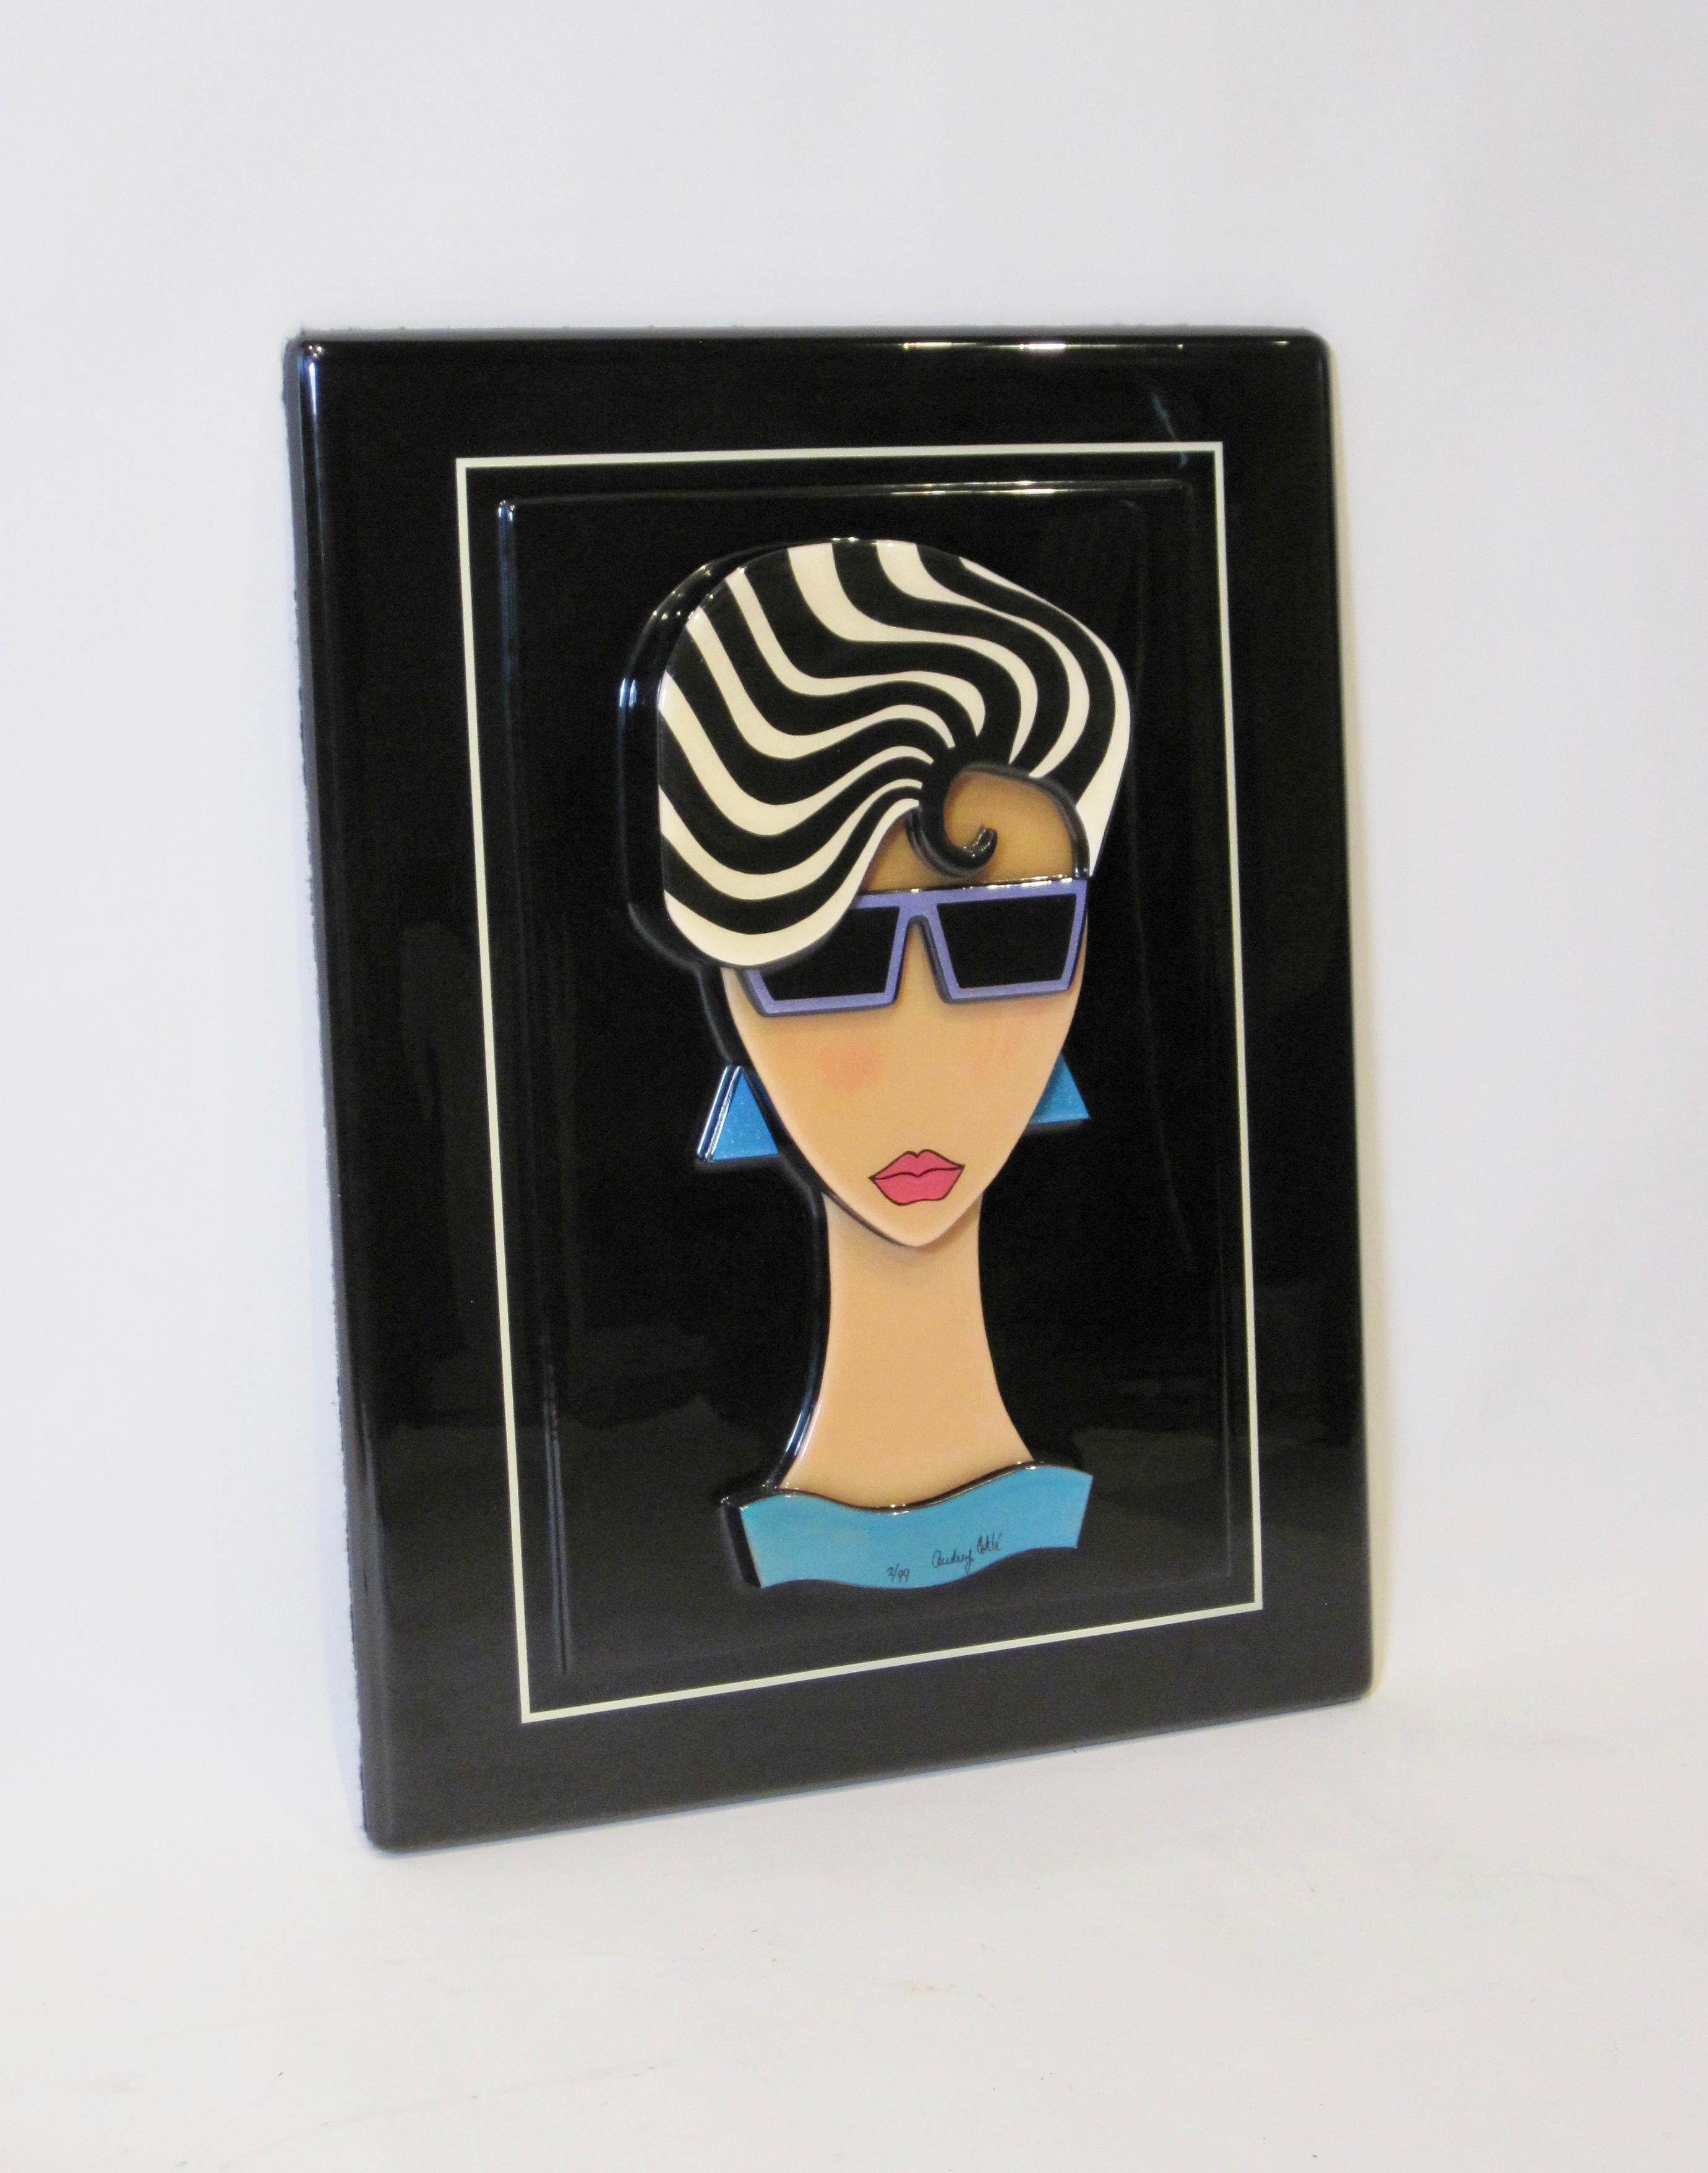 Vividly colored geometric forms against a black background spring forward on this theatrical three dimensional art relief sculpture. As a style statement, she's post-modern polished cool in the 'designer decade'- her black & blonde striped wavy